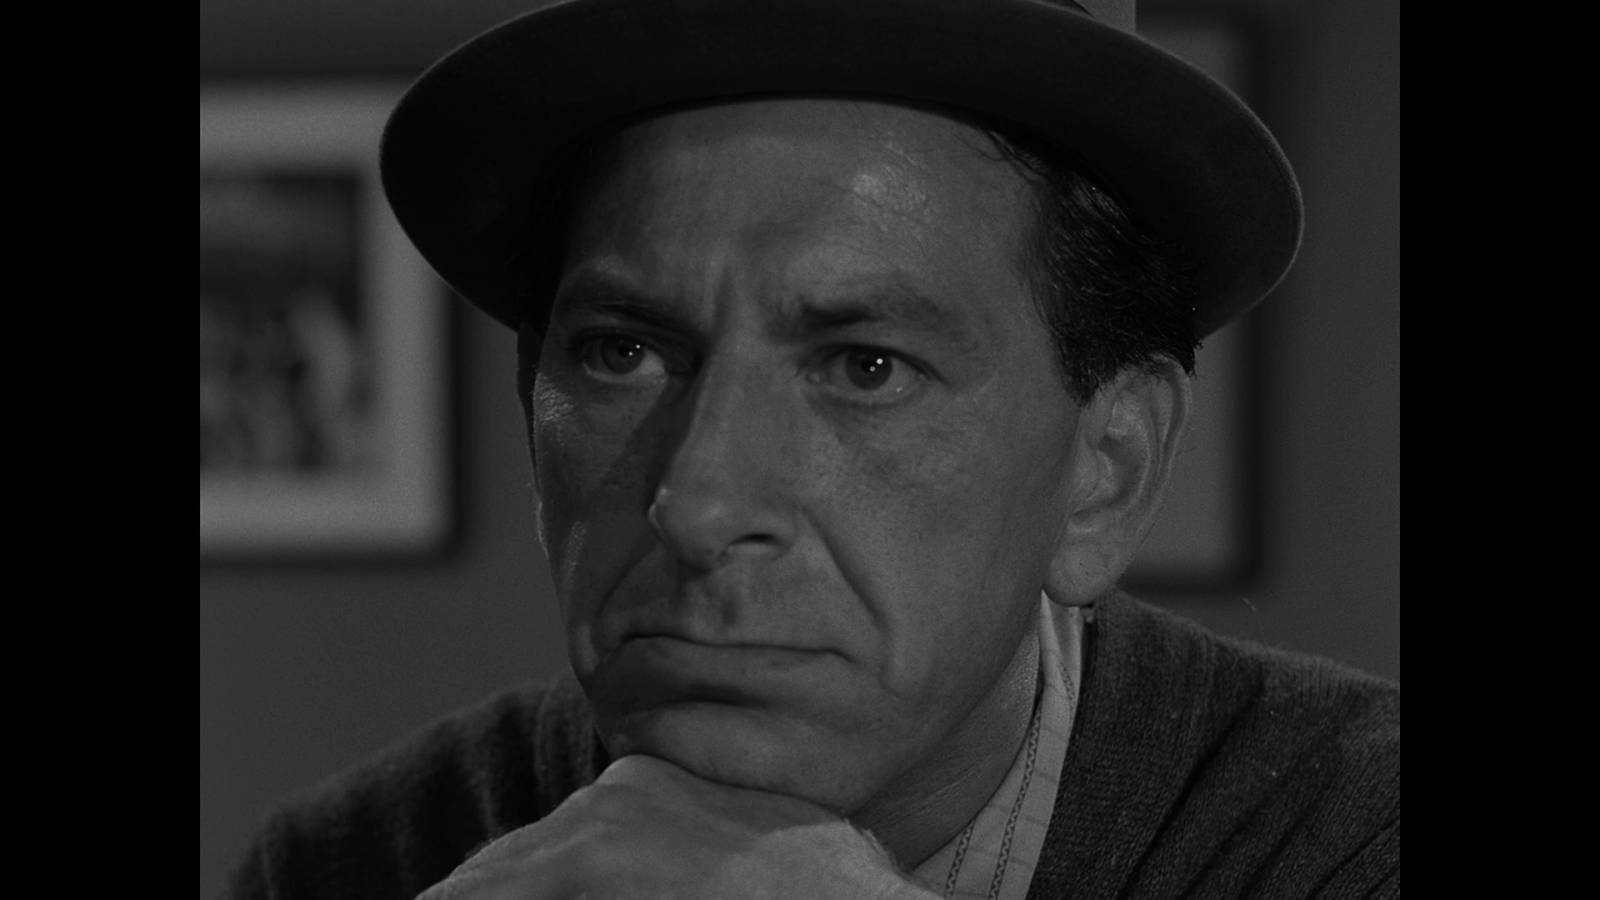 Jack Klugman in the Twilight Zone episode "A Game of Pool" Wallpaper